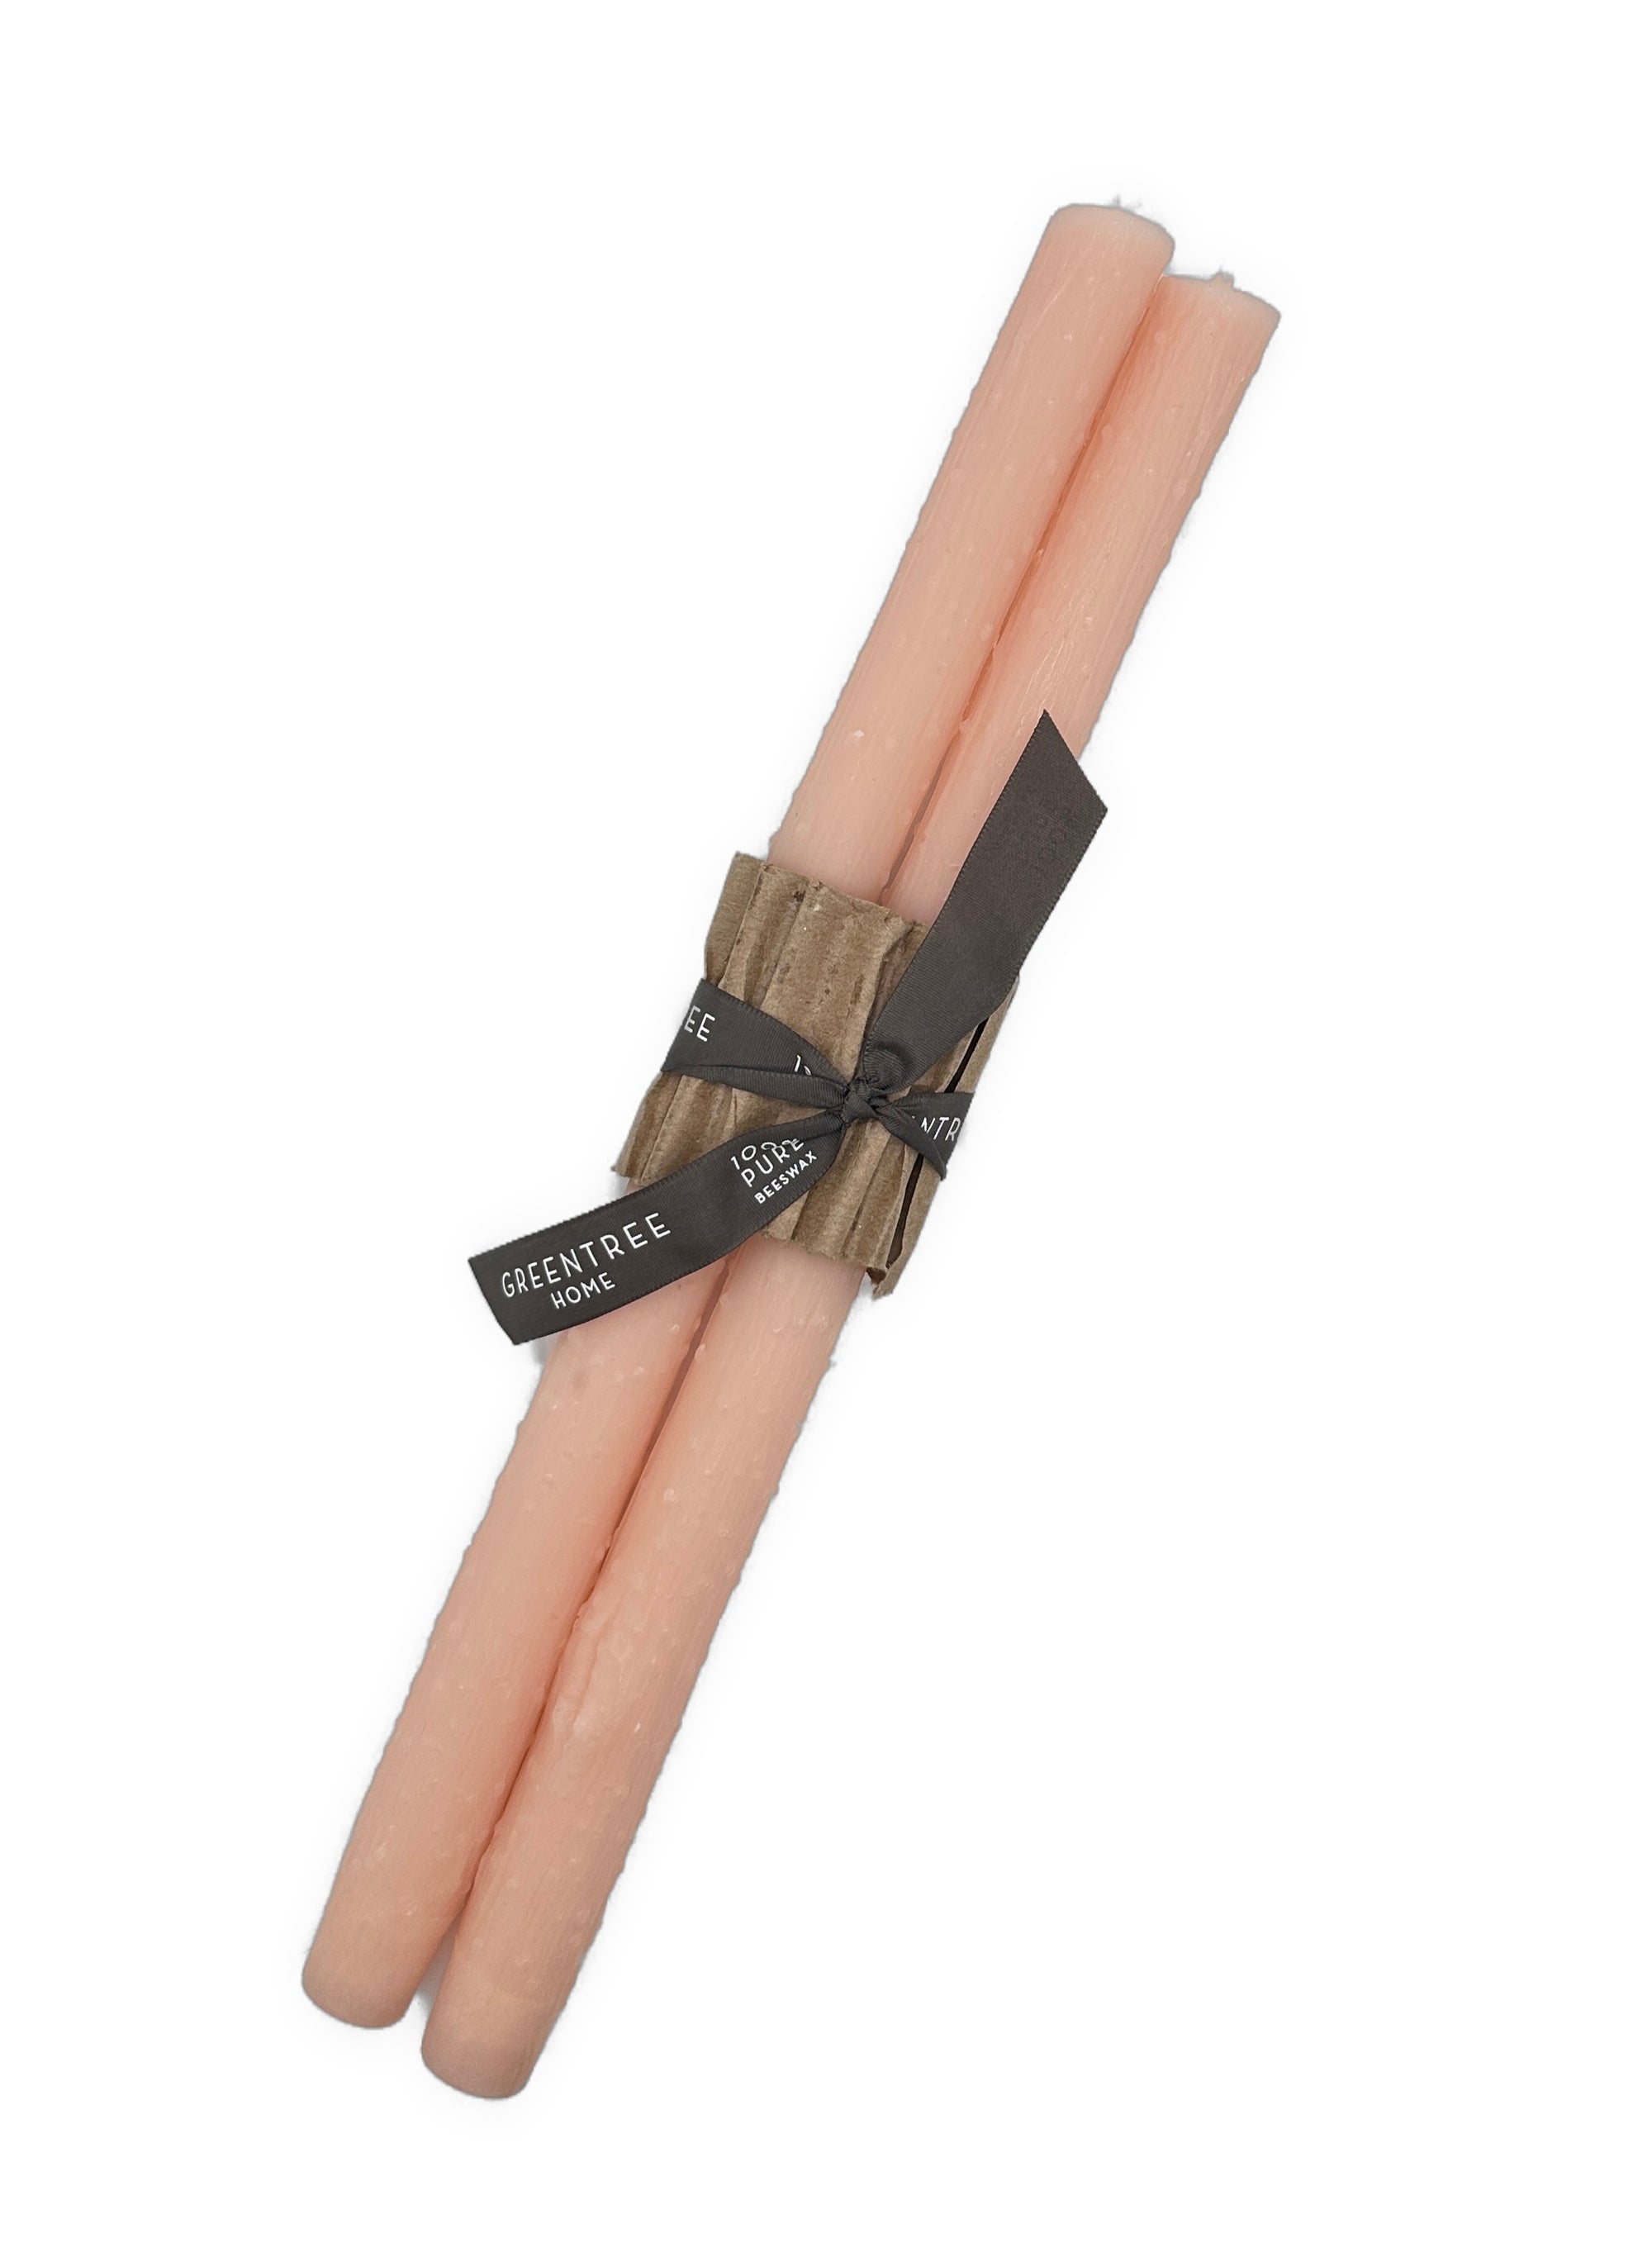 12" Blush Twig Taper Candles, Pair